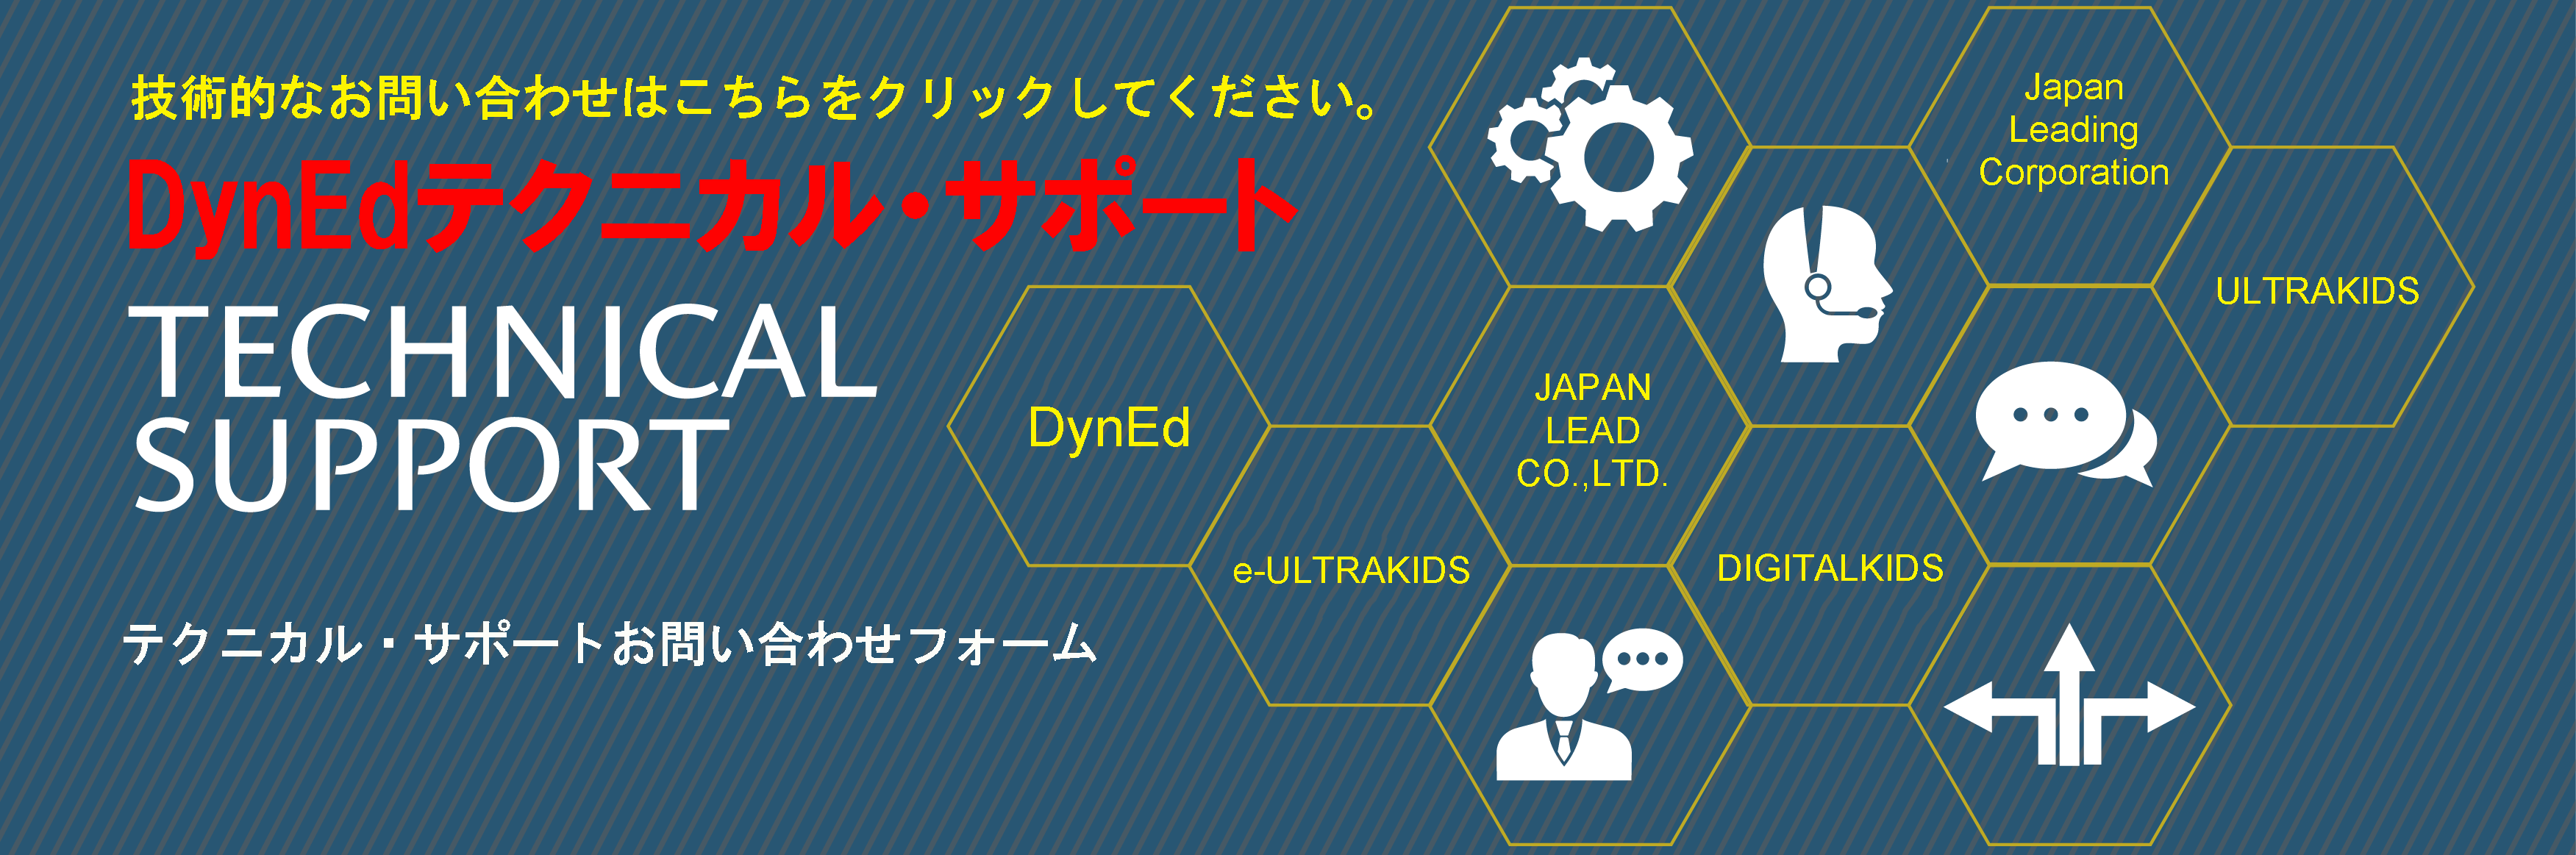 DynEd Technical Support